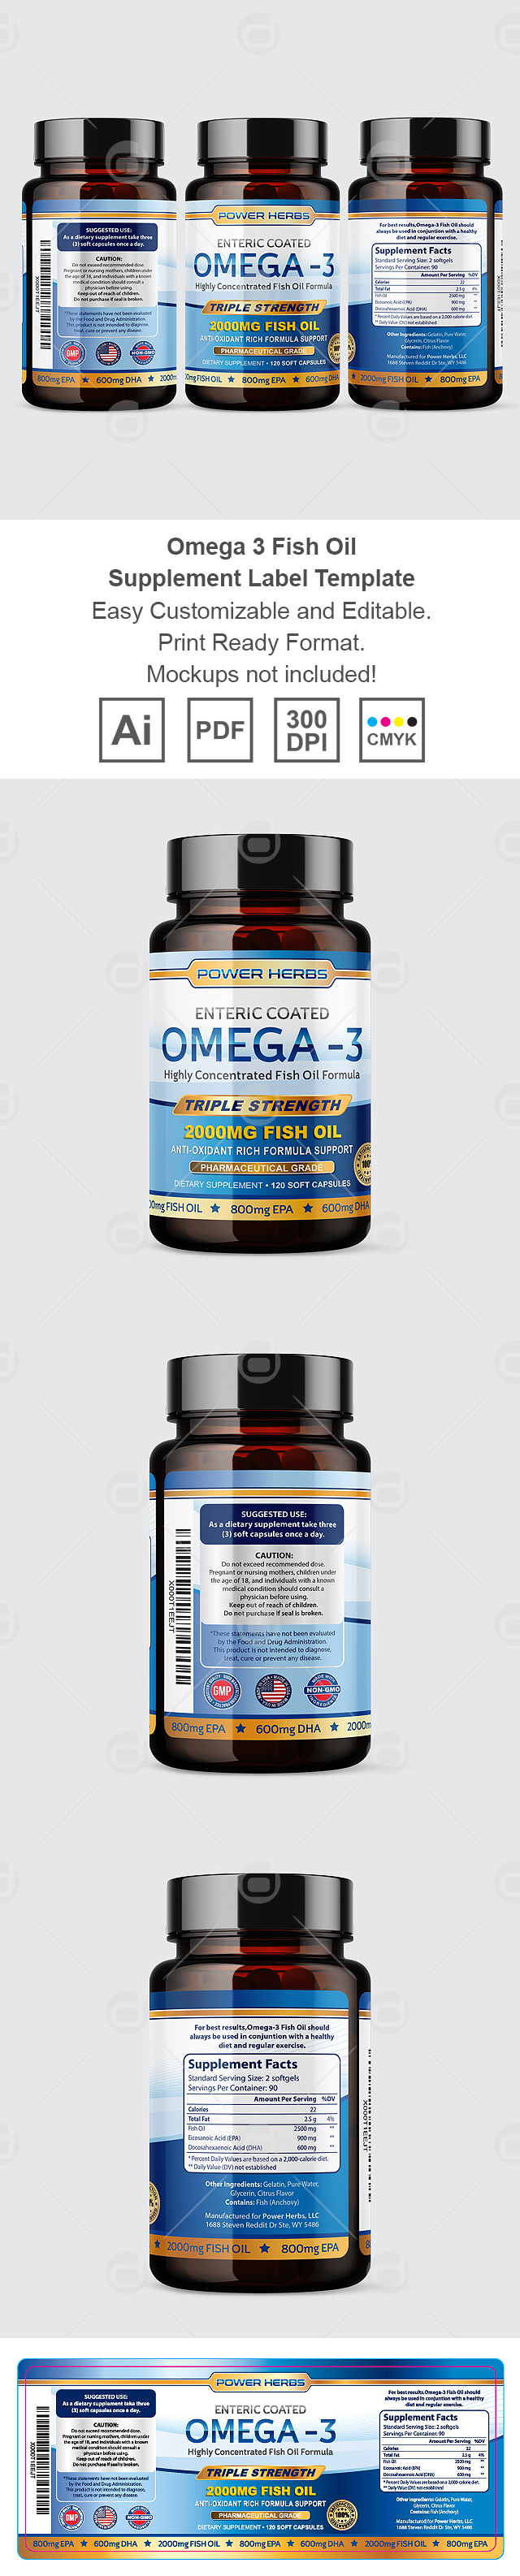 Omega-3 Fish Oil Supplement Label Template